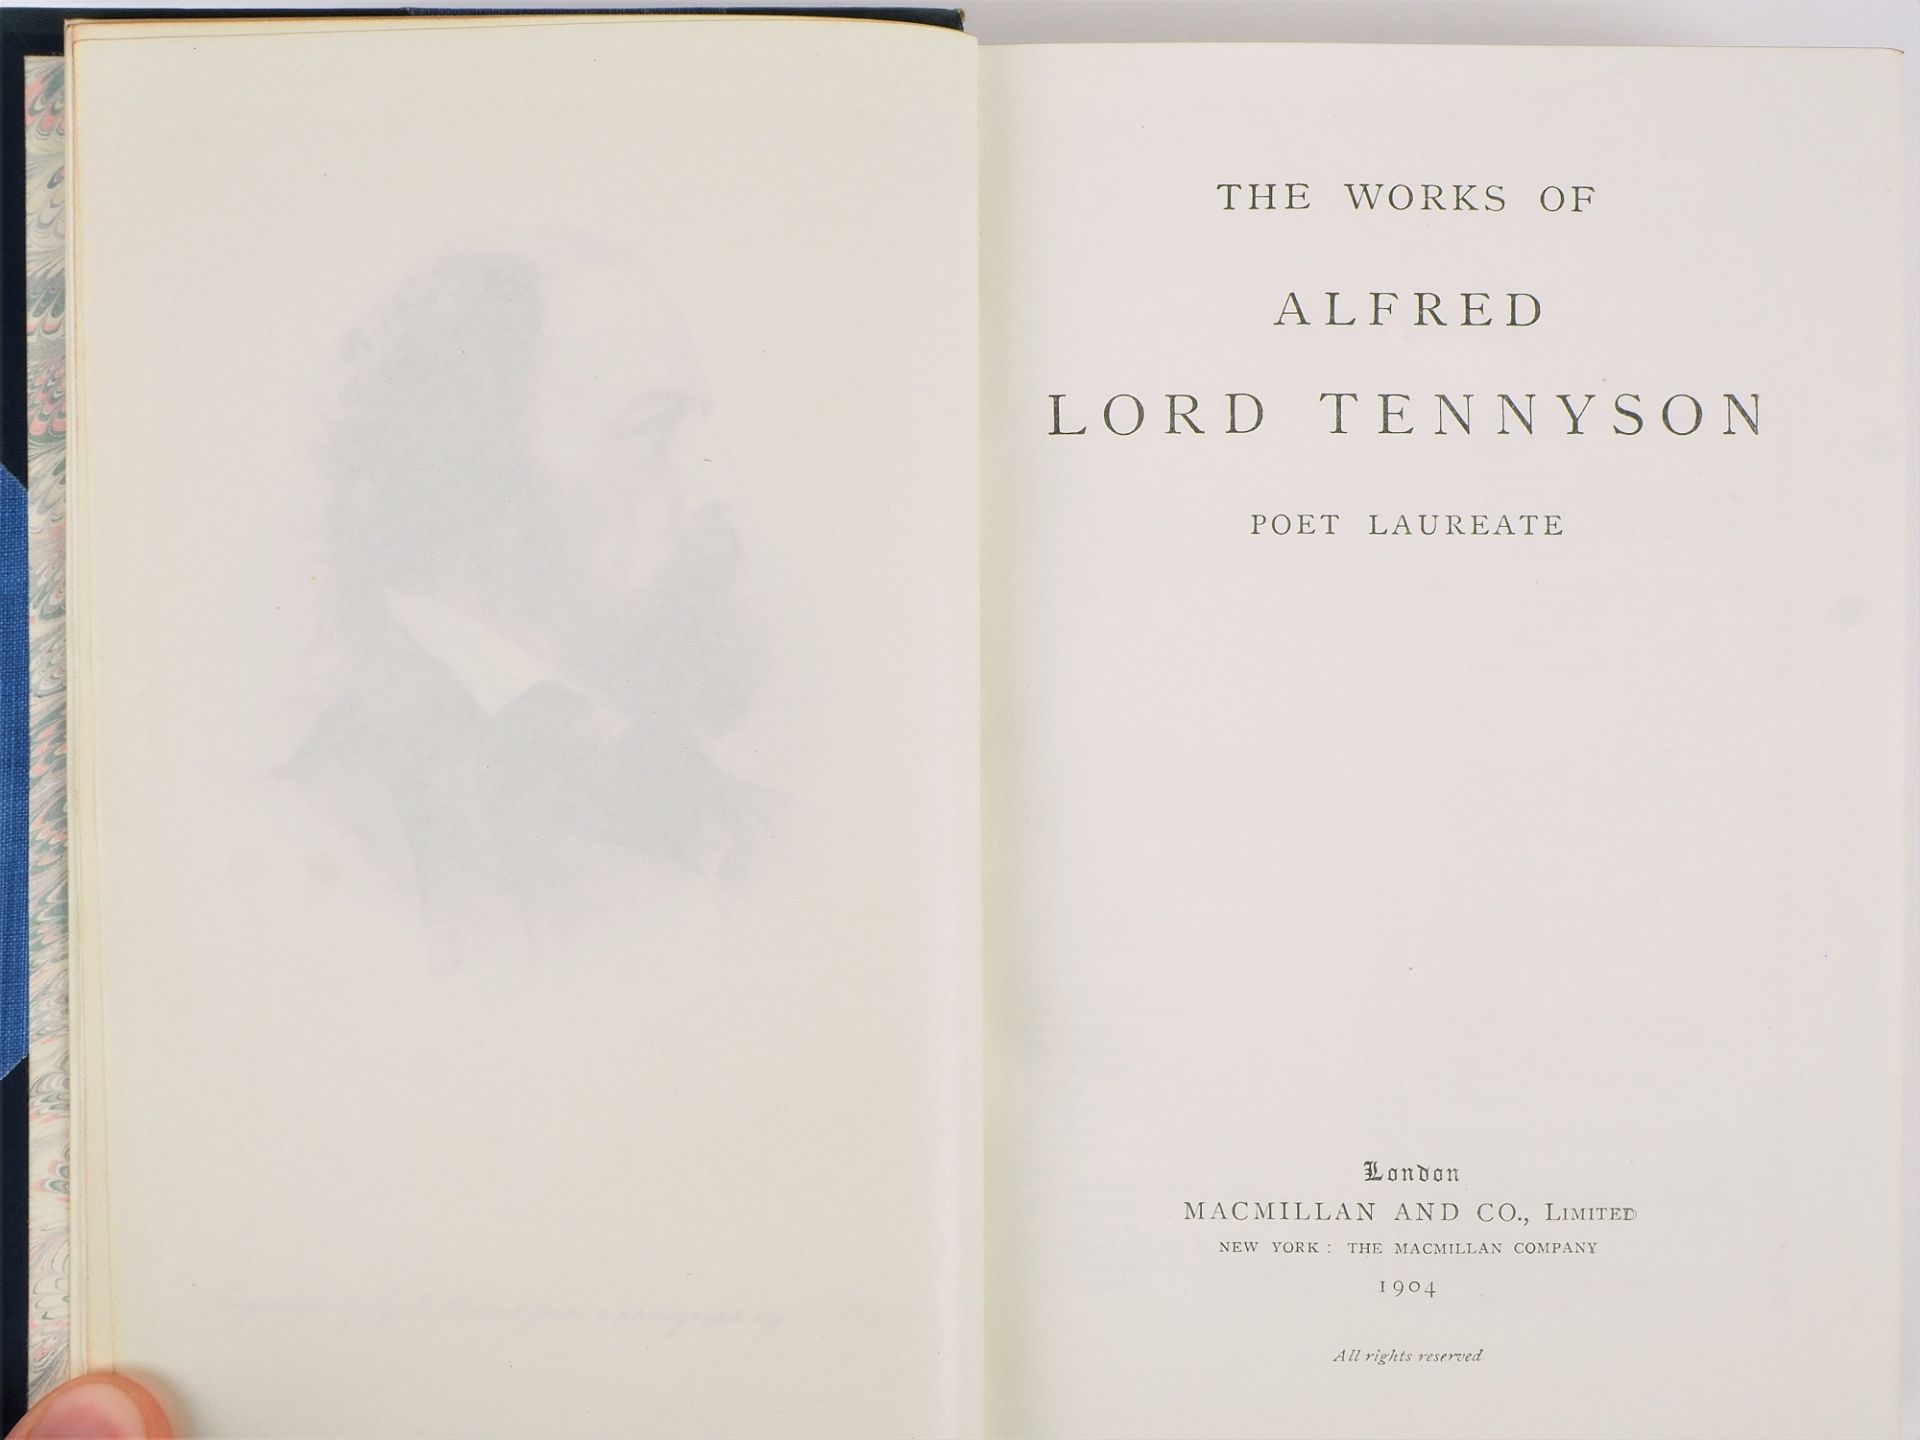 The works of Alfred Lord Tennyson, 1904 - Image 2 of 3